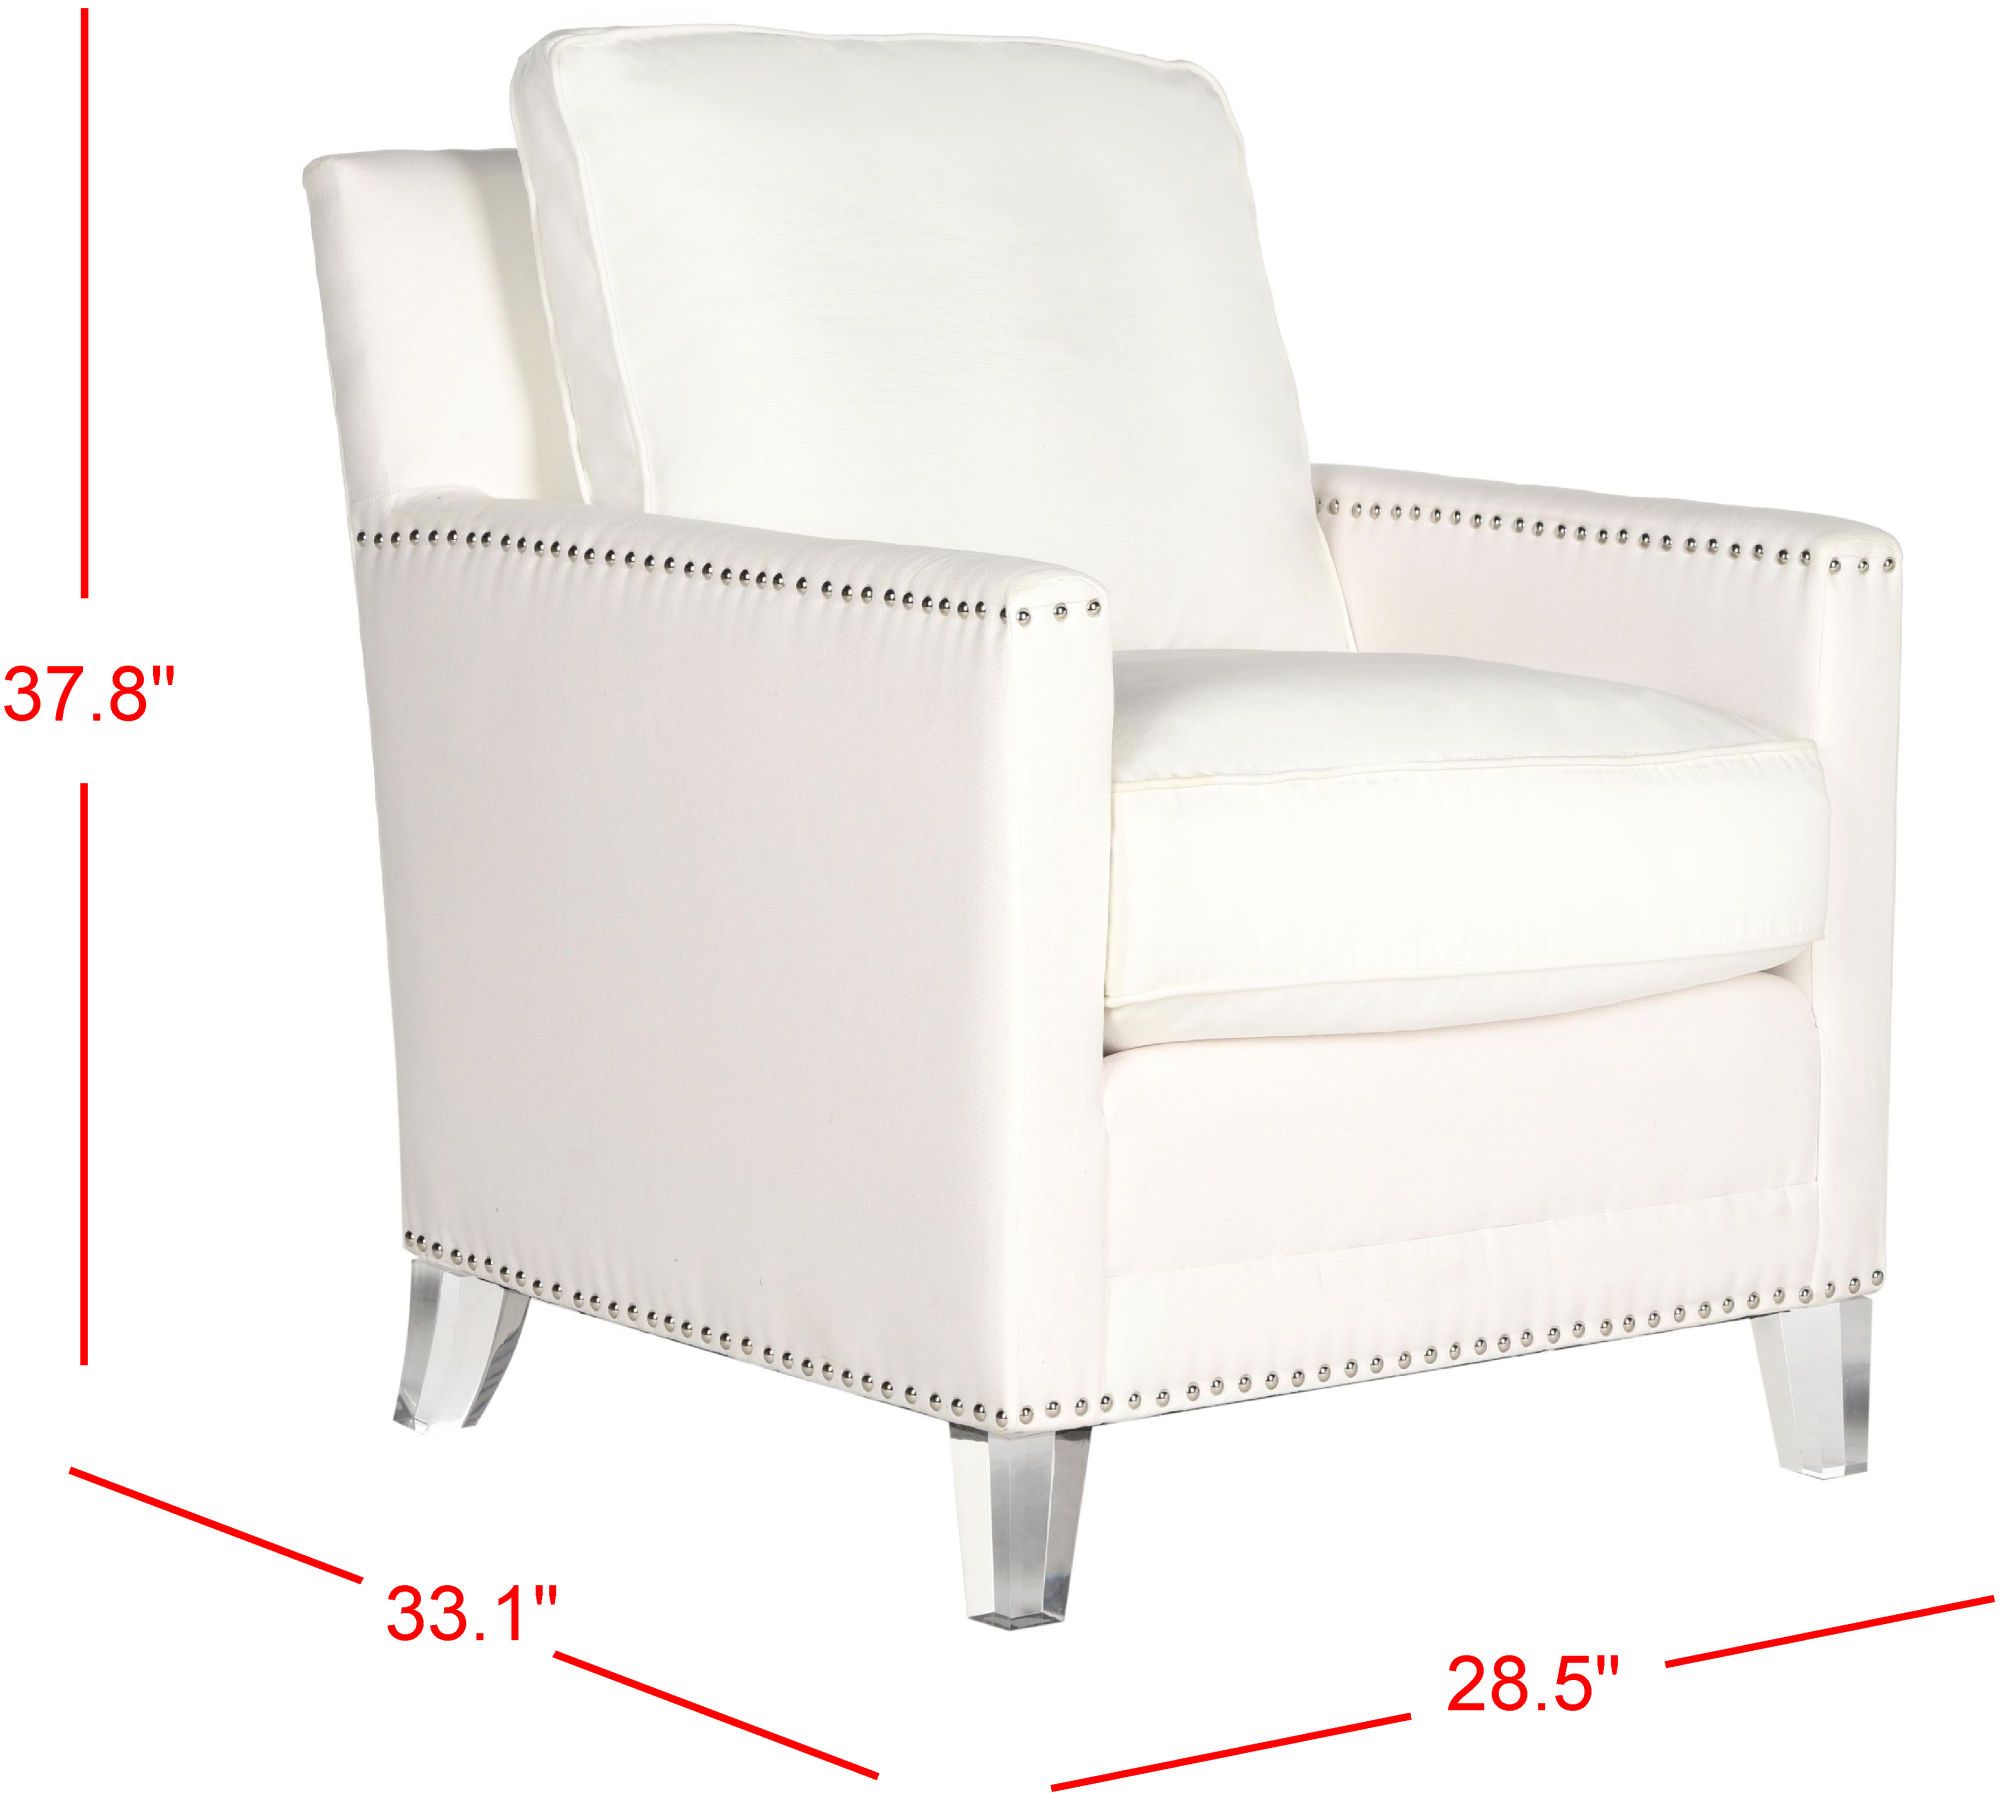 1 Hollywood Glam Tufted Acrylic White Club Chair W/ Silver Nail Heads Intended For White And Clear Acrylic Tufted Vanity Stools (Gallery 19 of 20)